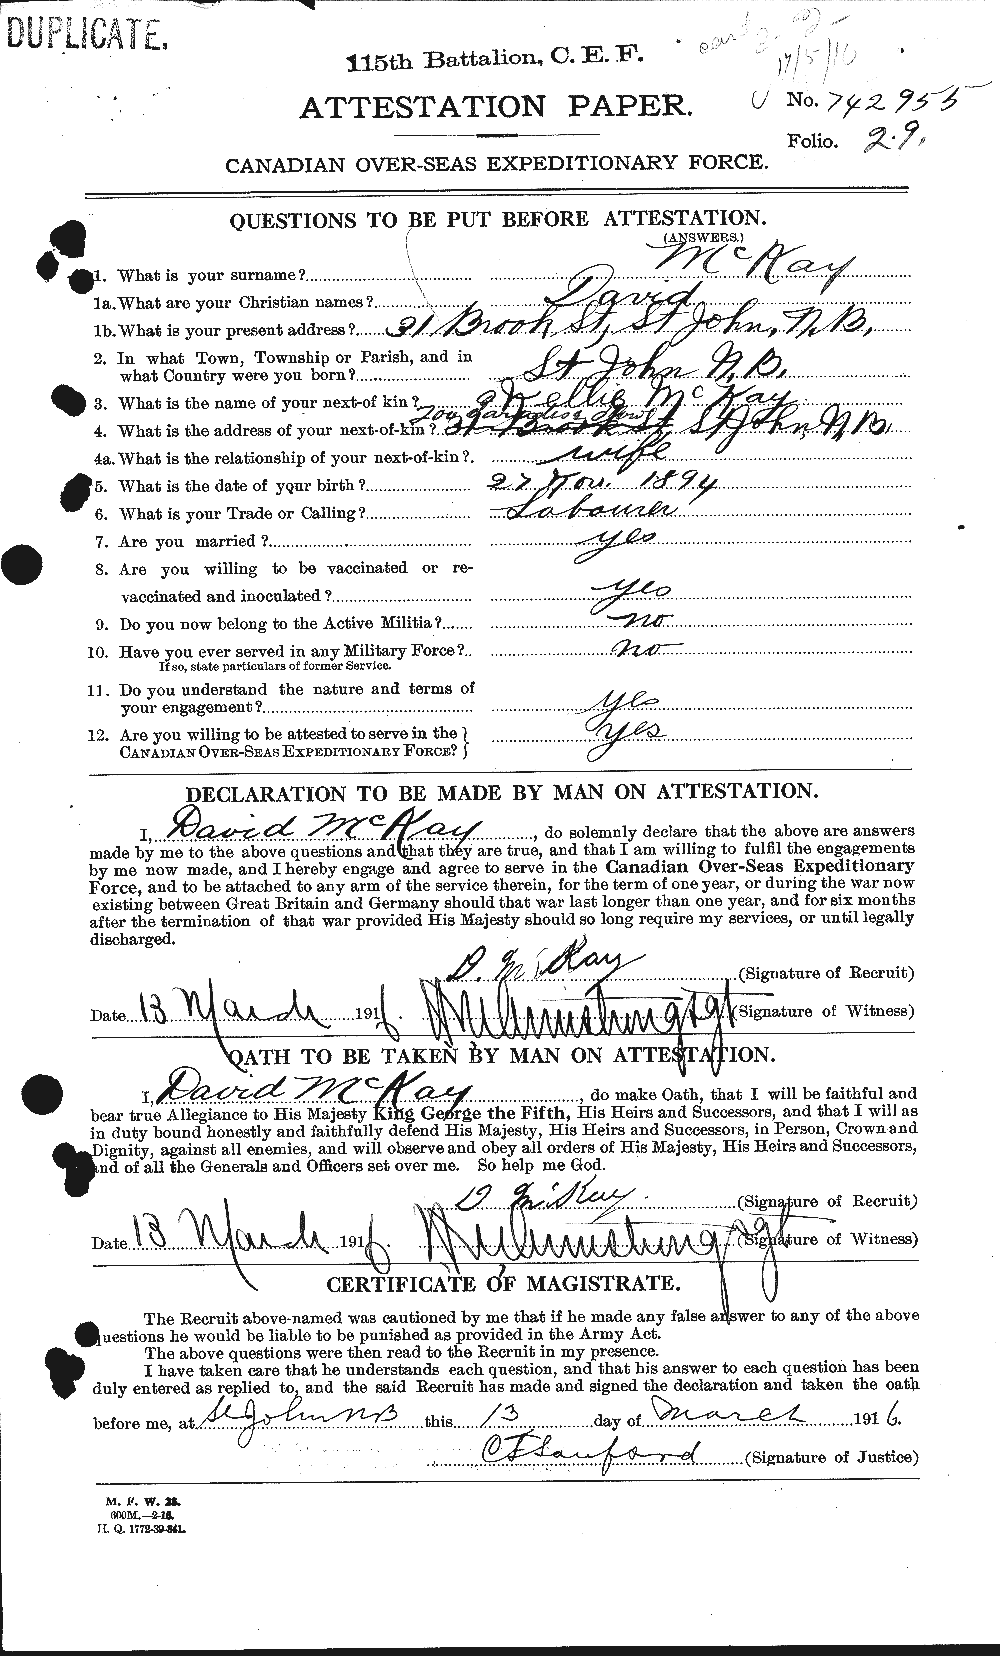 Personnel Records of the First World War - CEF 531134a